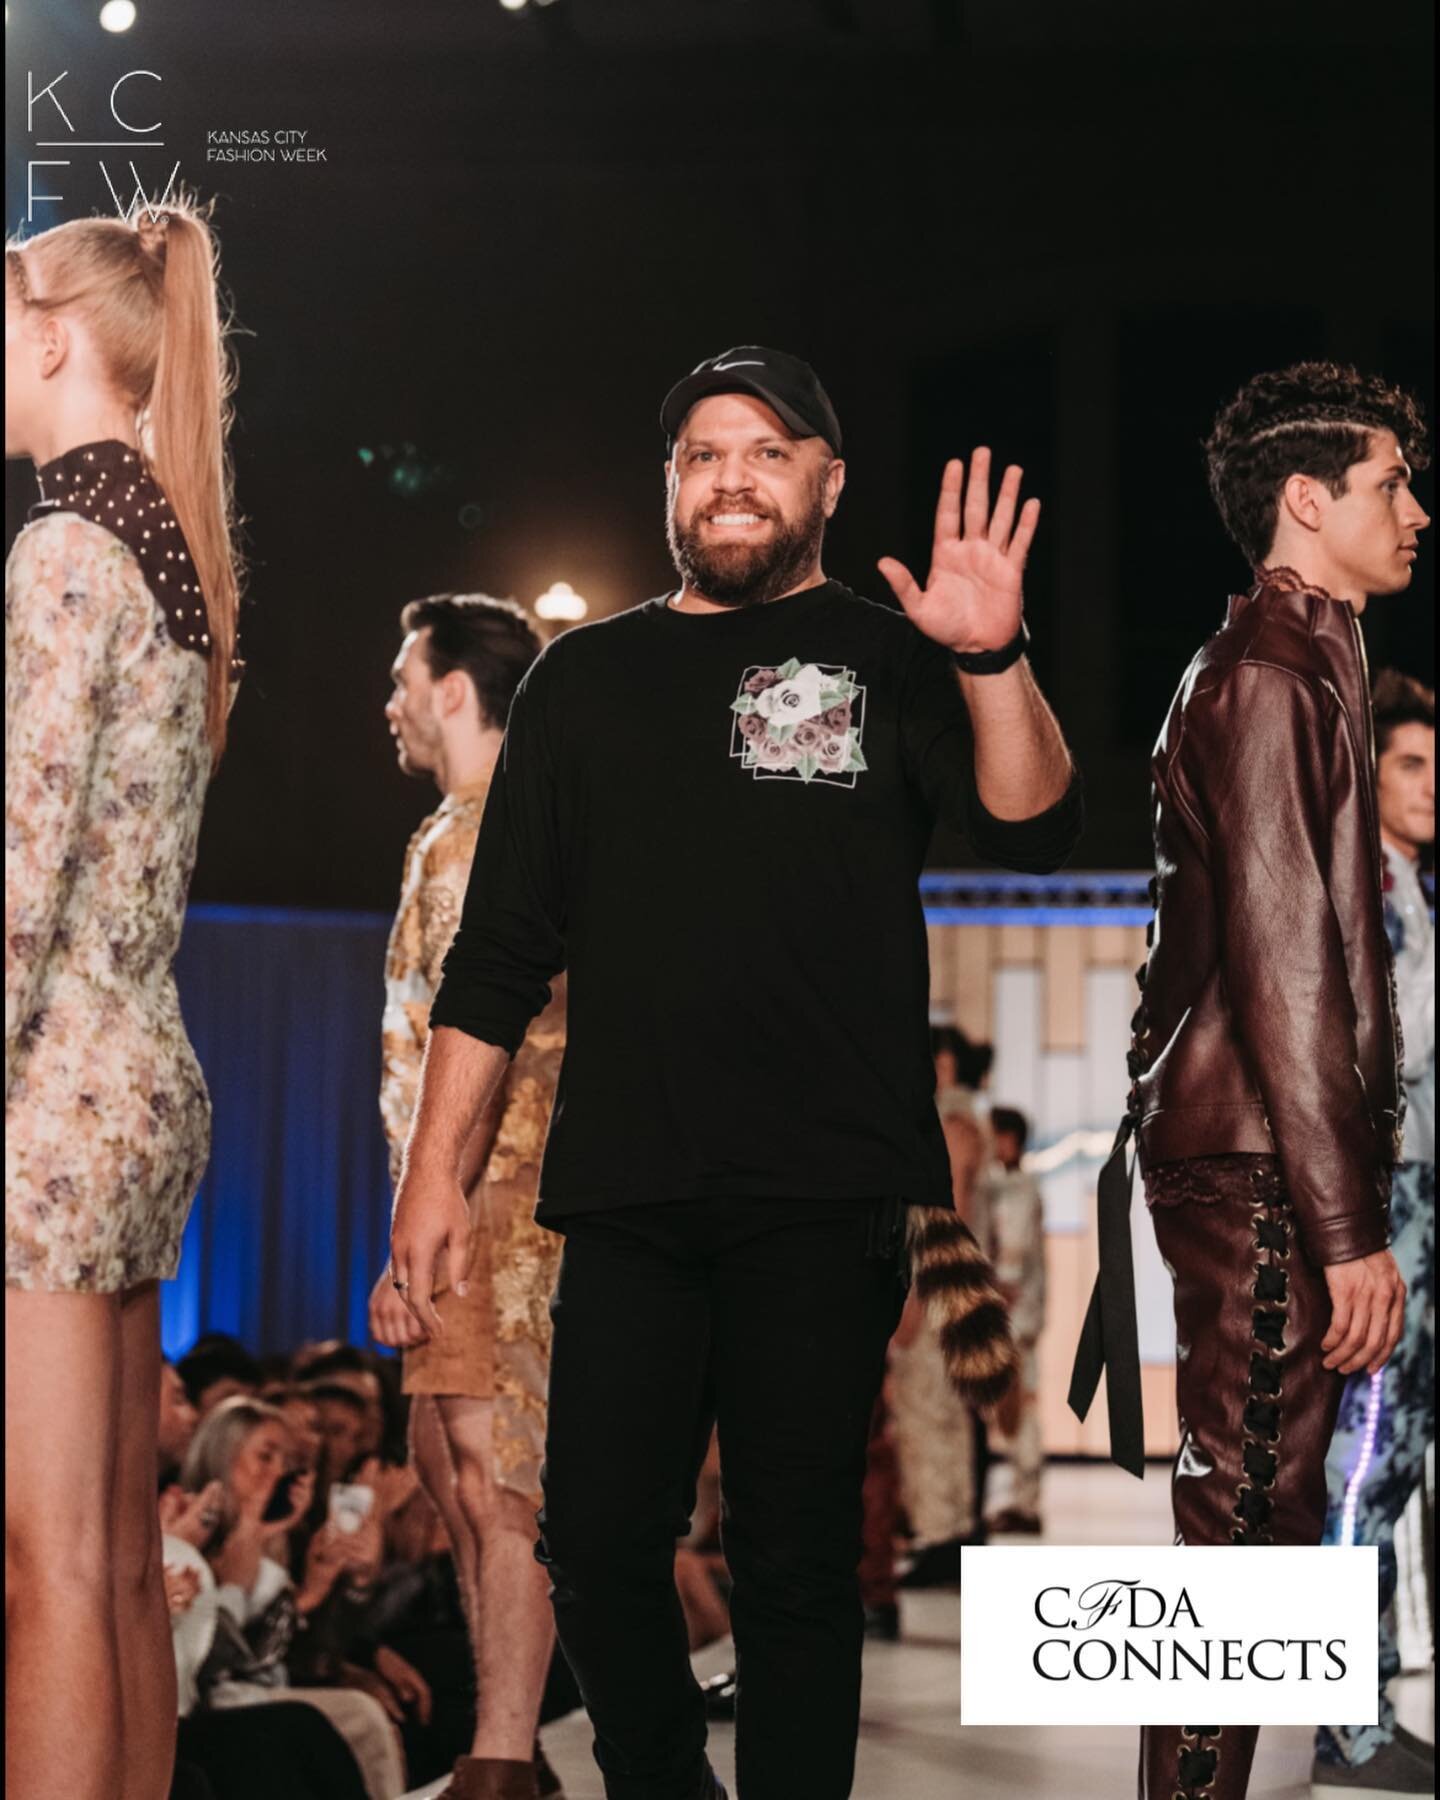 Don&rsquo;t miss your chance to have your designs seen by the top tastemakers in the industry!

Design applications close tomorrow, so now is the time to submit yours if you want to join us in our #CFDAConnects Runway360 debut! The new program means 